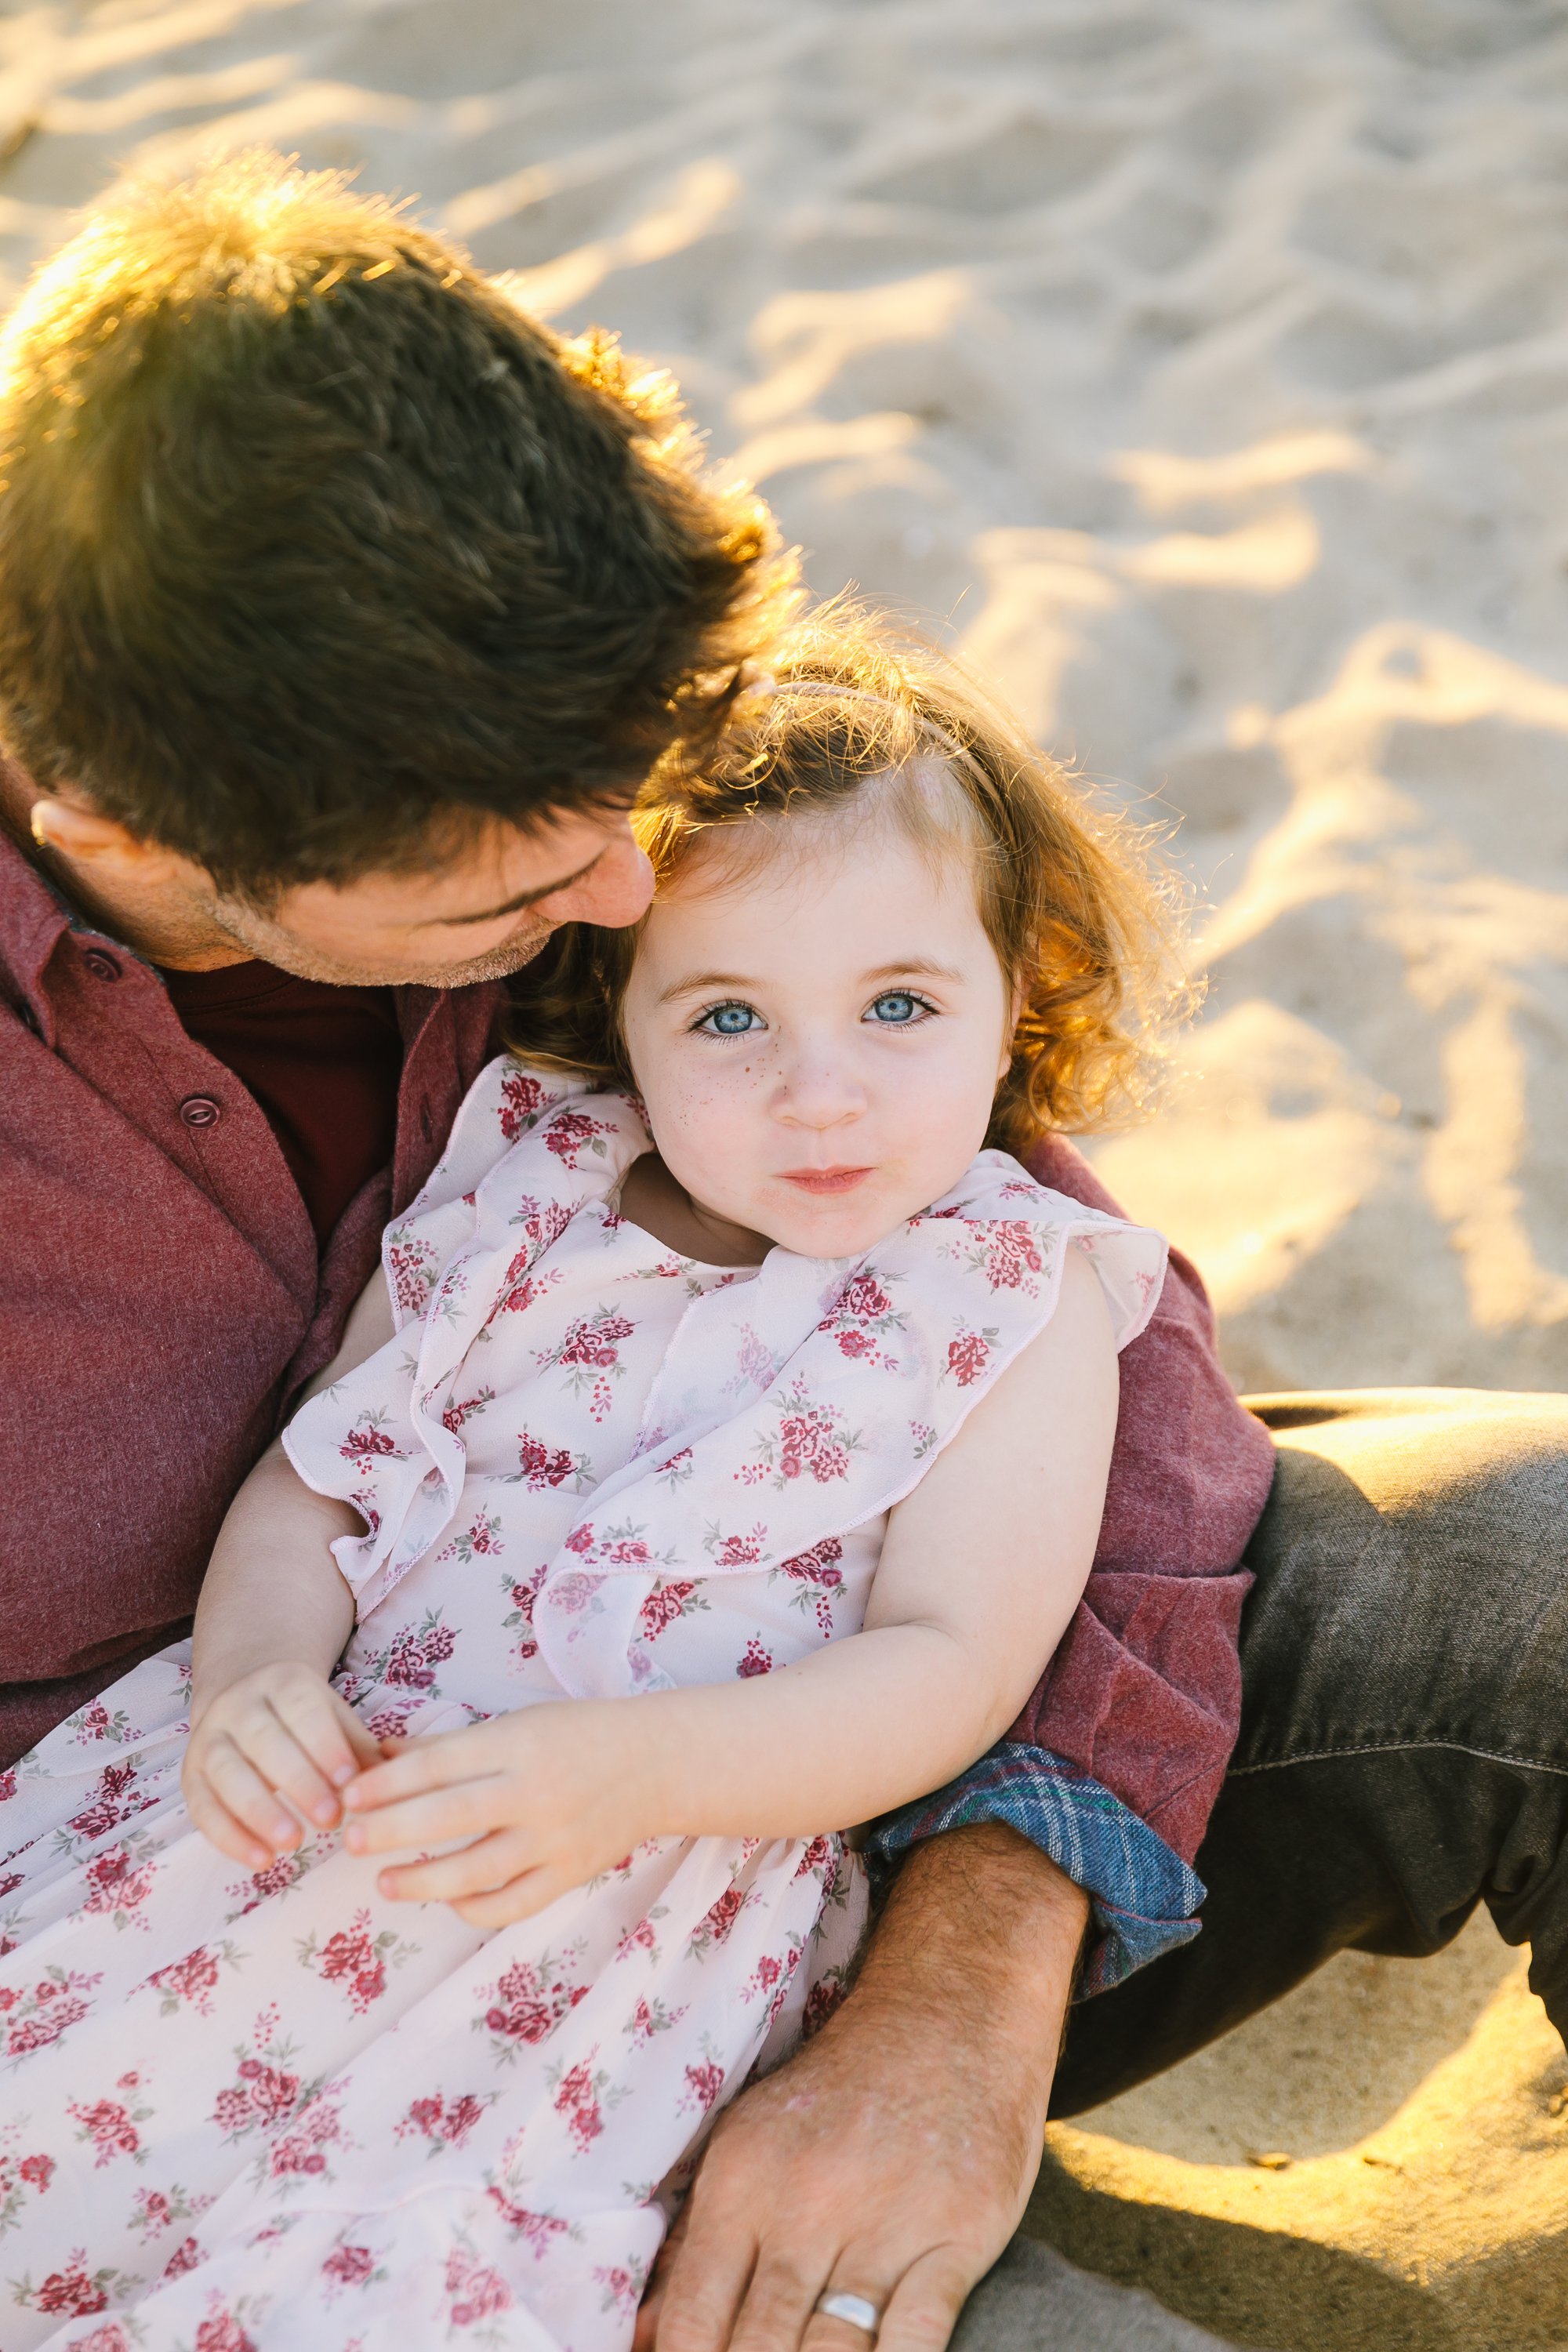 Los_Angeles_Family_Photographer_Mini_session_Golden_hour_Beach_Kid_Maternity_baby_Children_Holiday_Photography-2195.jpg